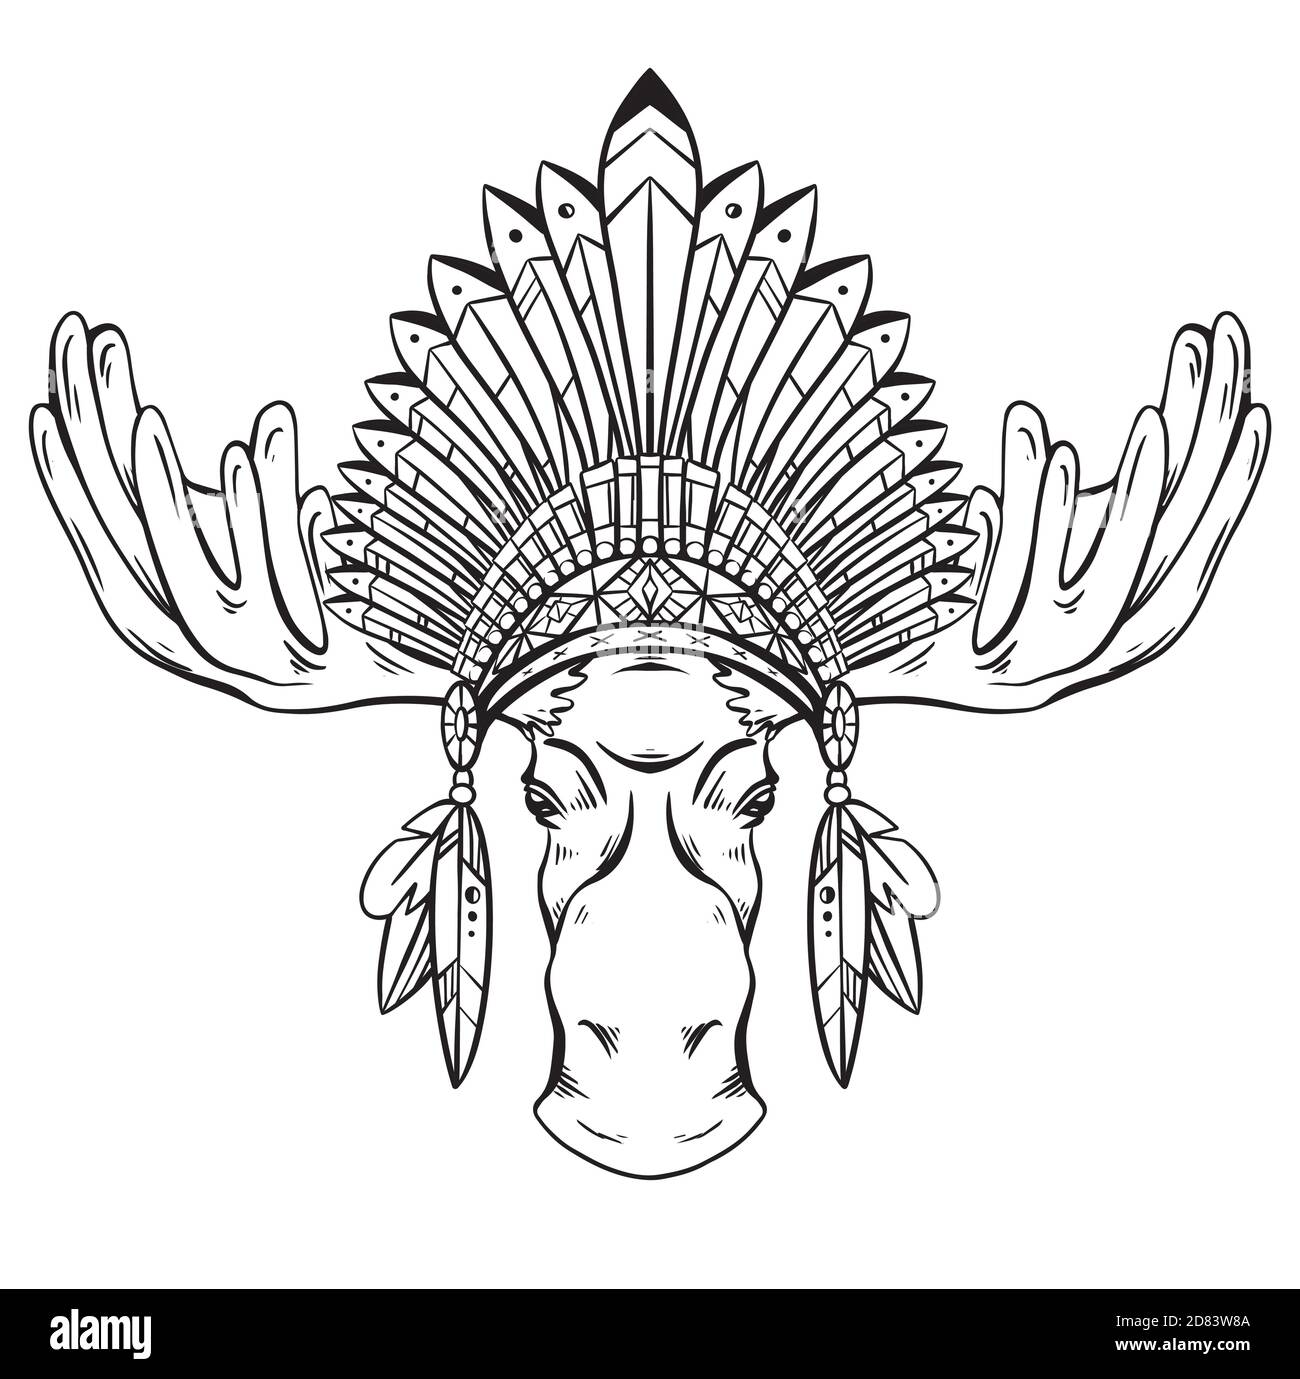 Engraved contour illustration of a moose head with antlers and an Indian cap made of feathers. Roach Chieftain. Boho vector illustration for cards, st Stock Vector